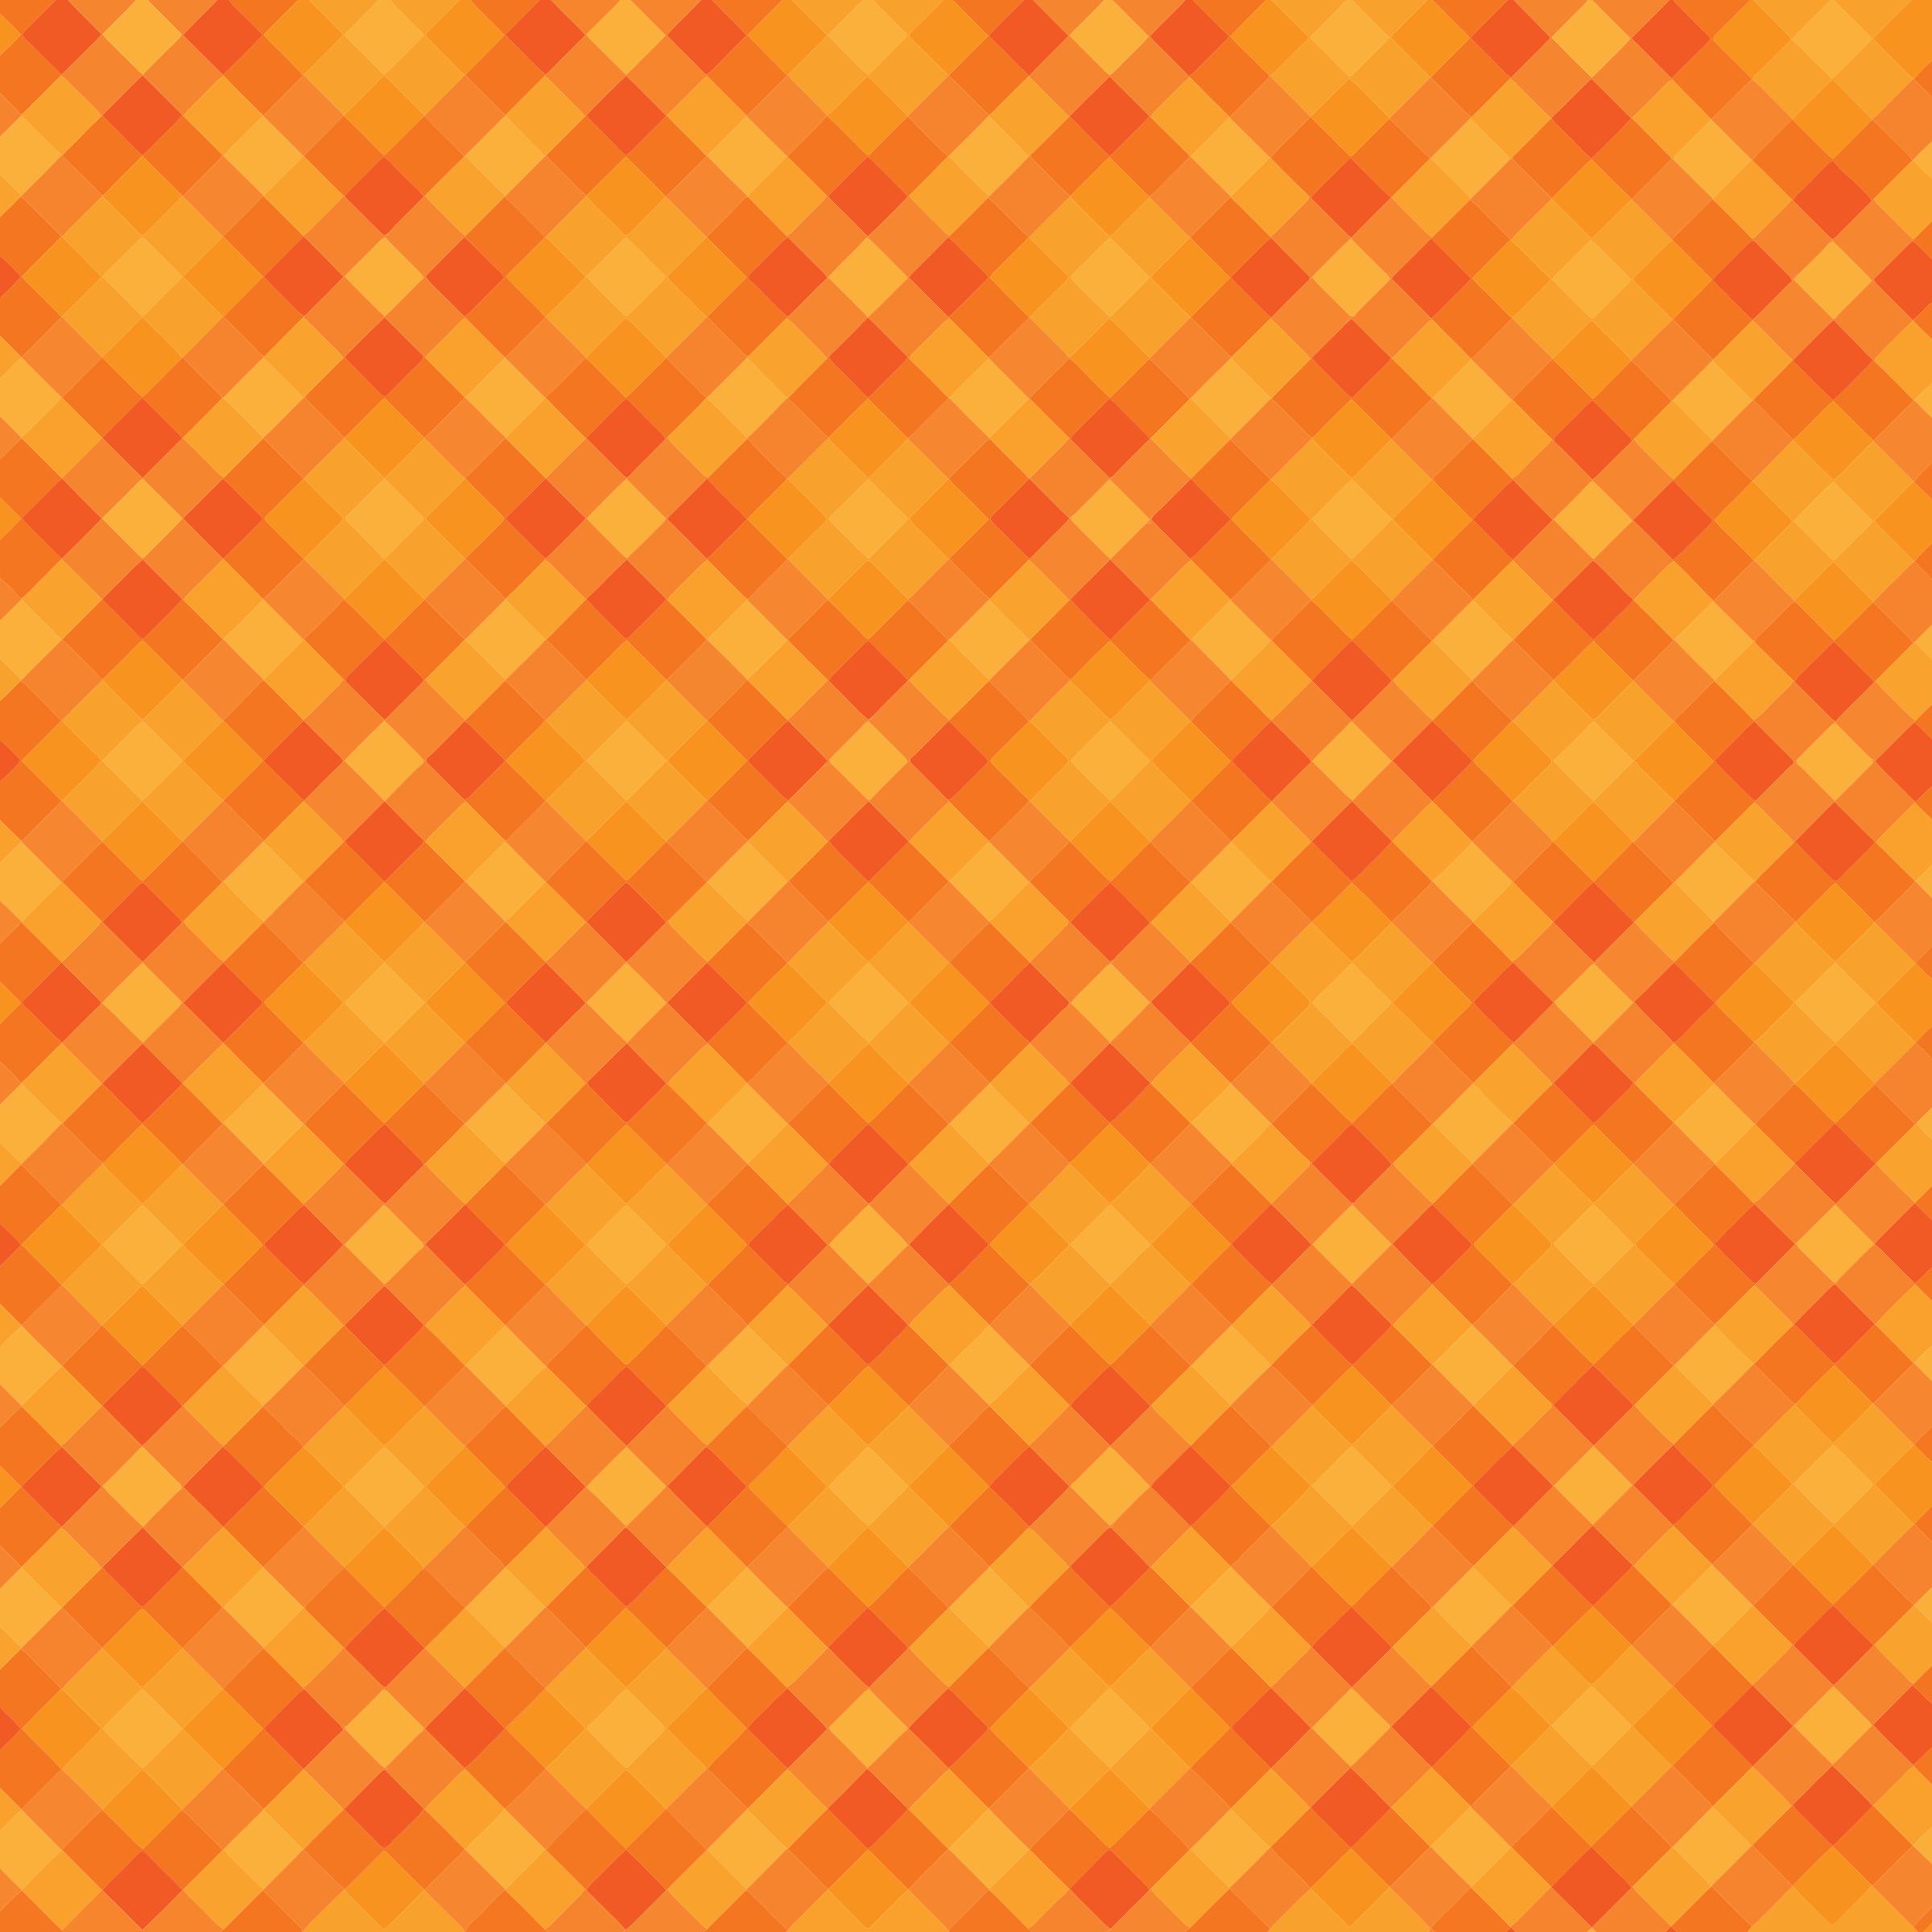 Orange Gingham Checkered Background png